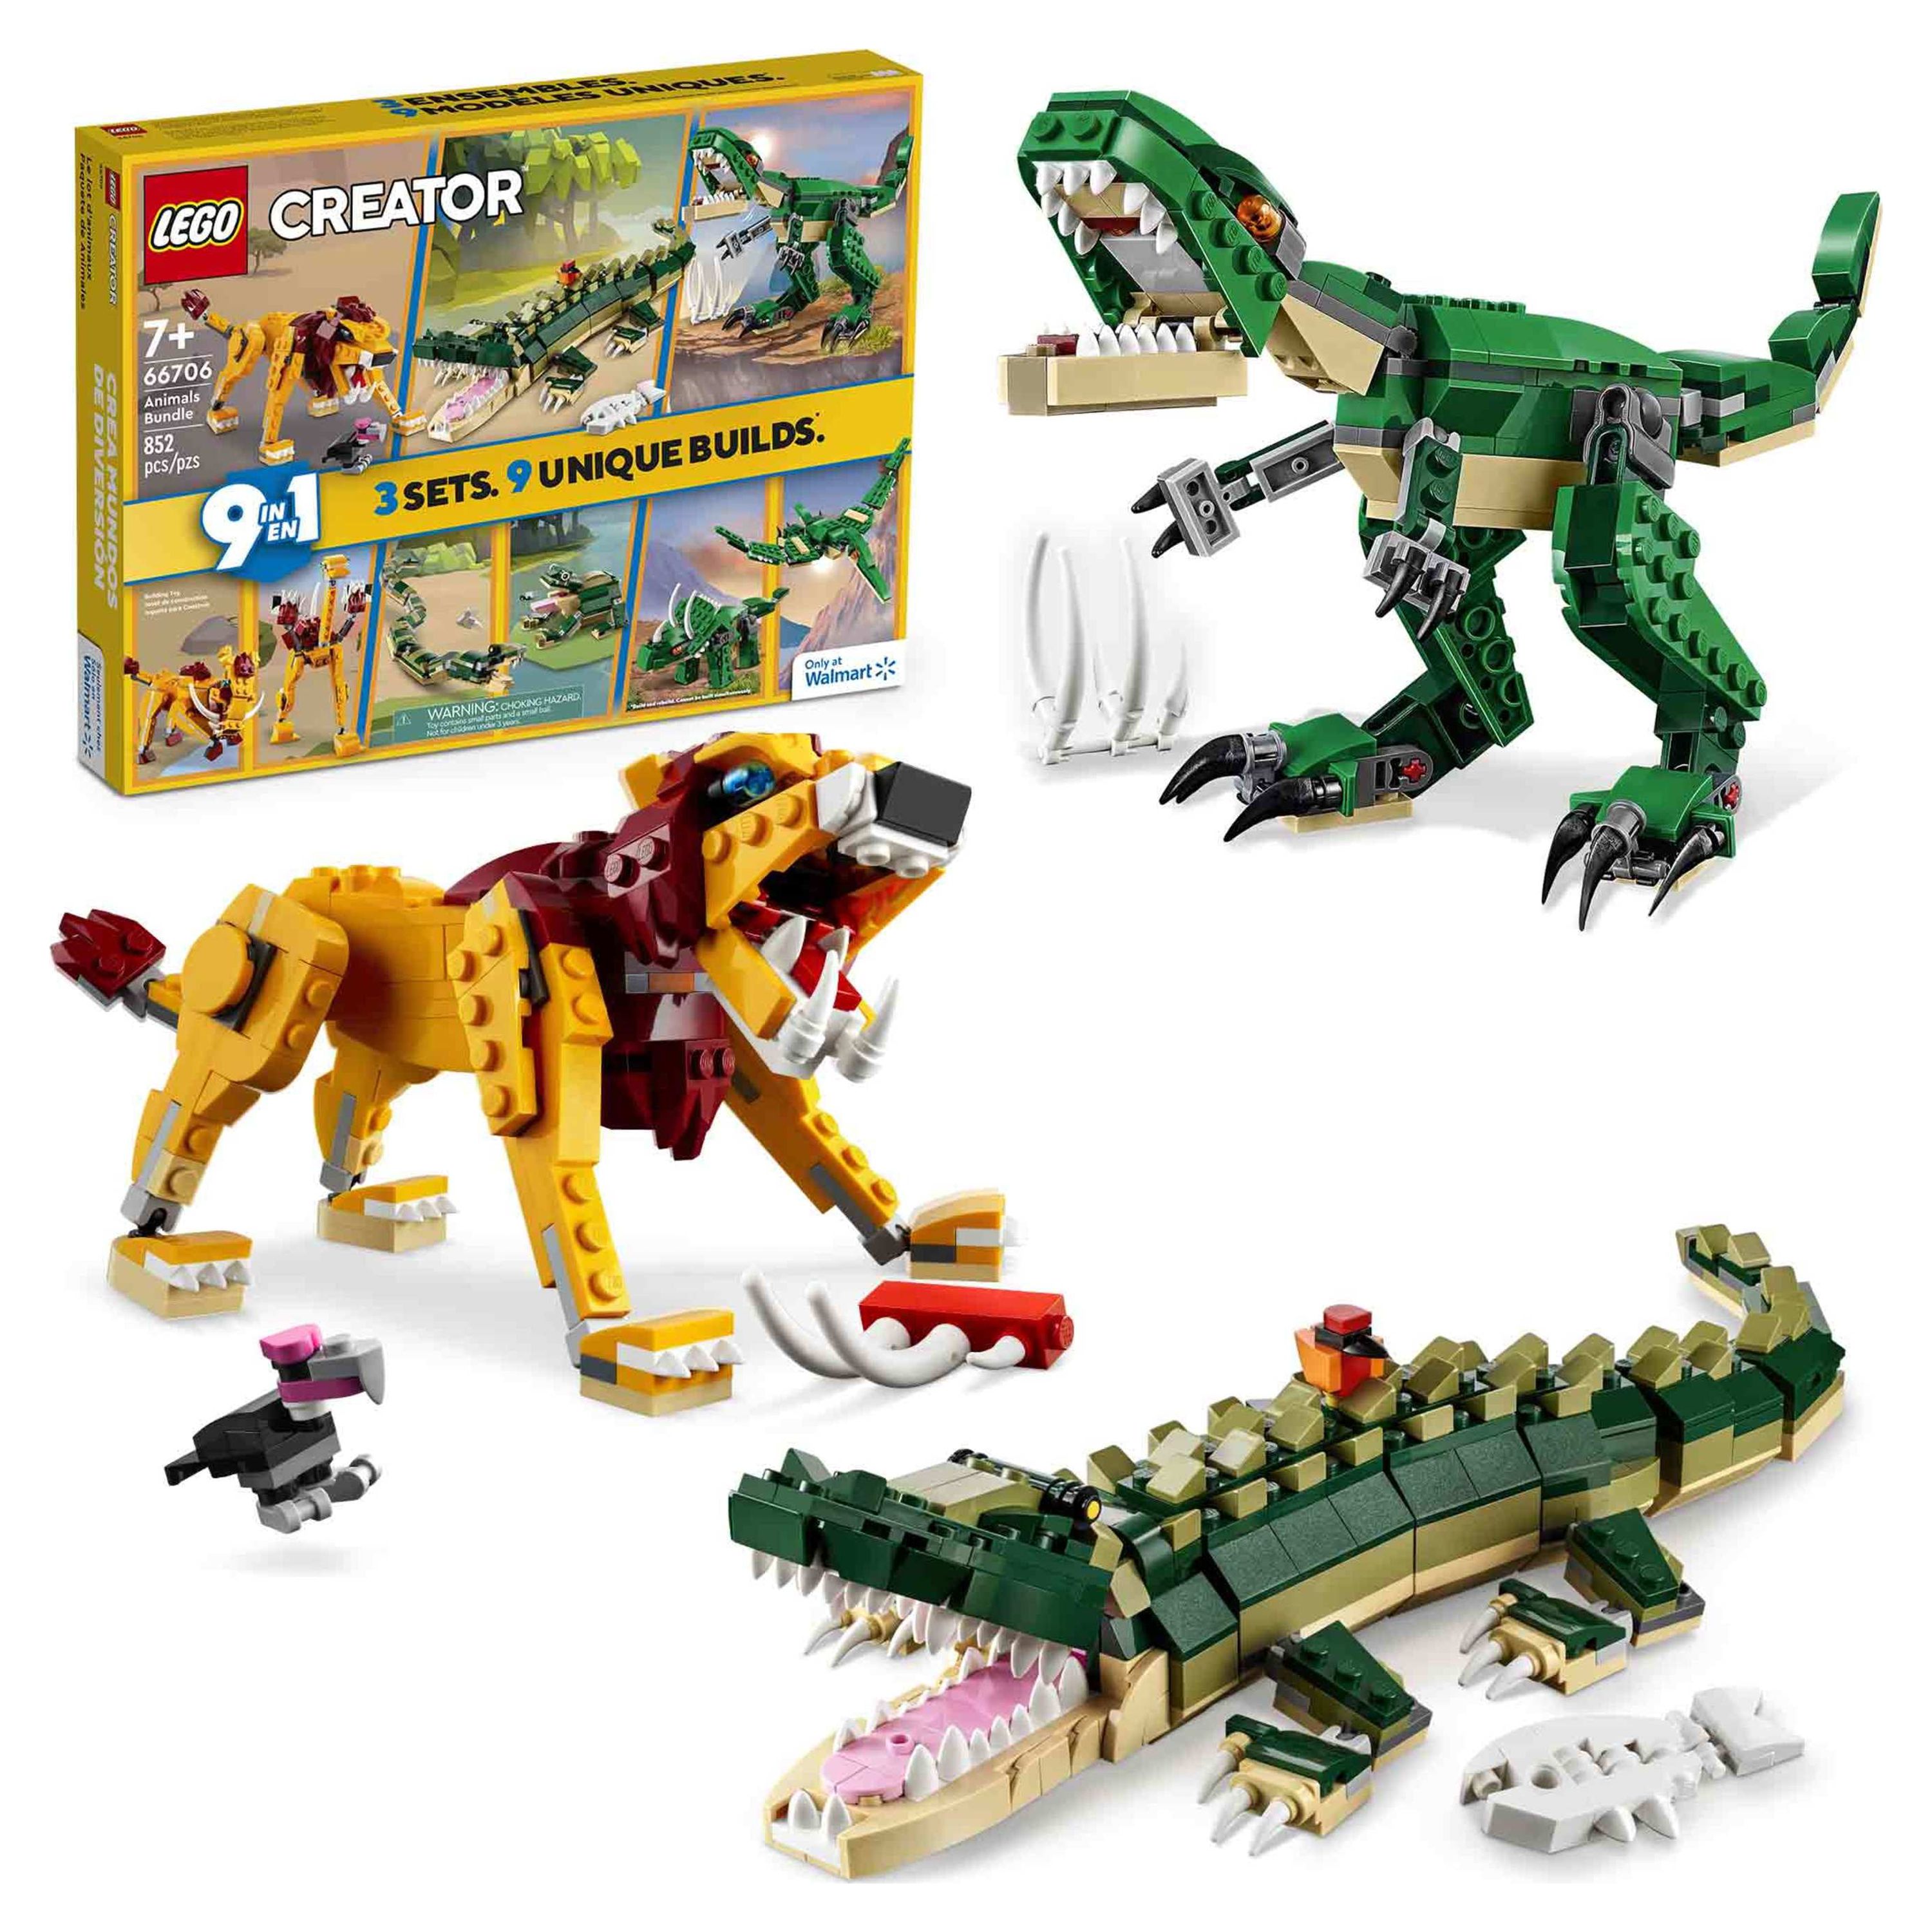 LEGO Creator Animals Bundle Walmart Exclusive includes 3 different 3in1 builds 66706 - image 1 of 7